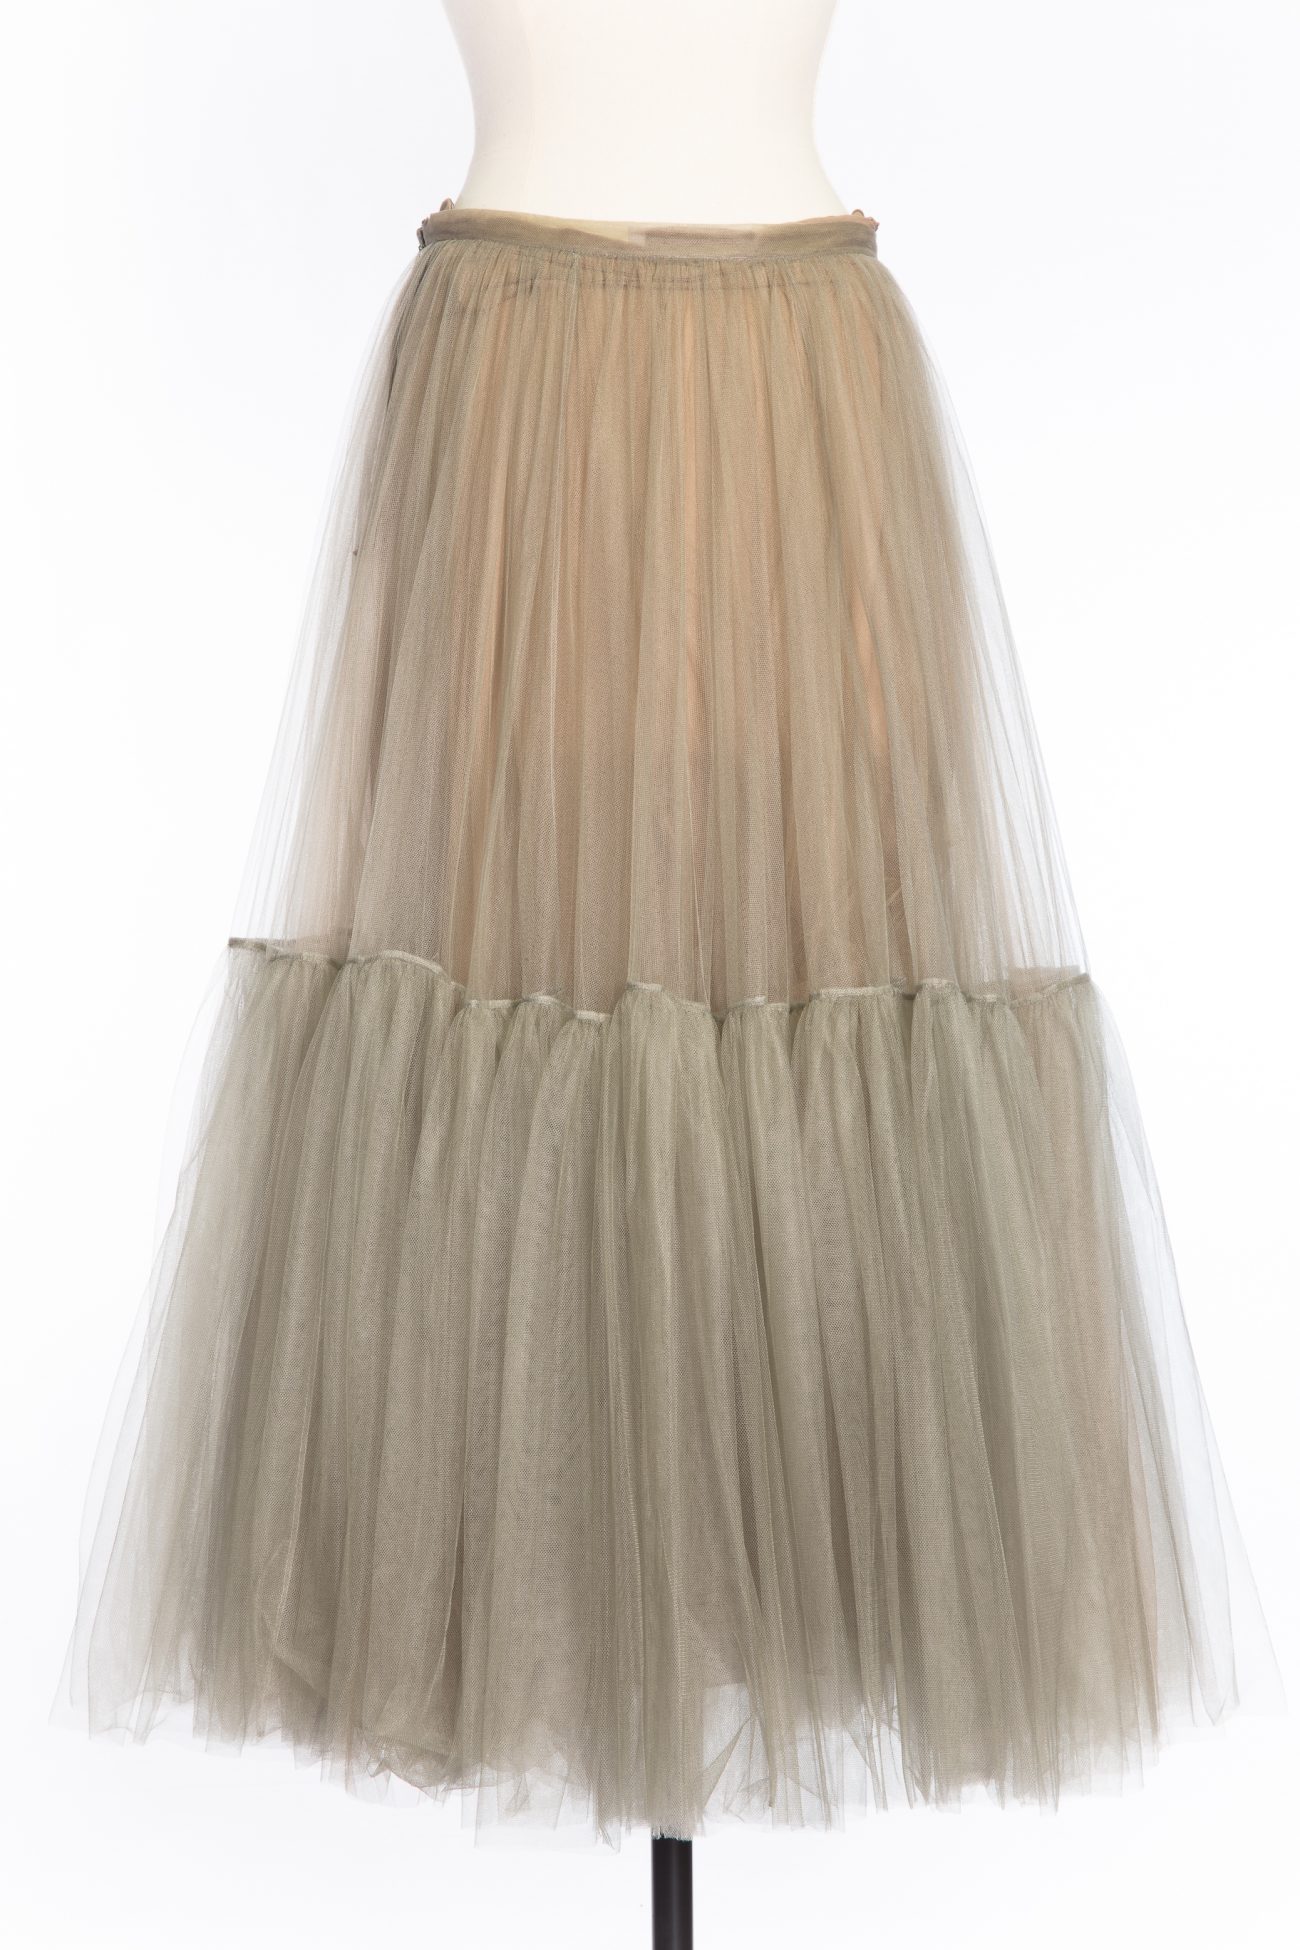 Christian Dior Blush Beige Mesh Pleated Tulle Layered Skirt